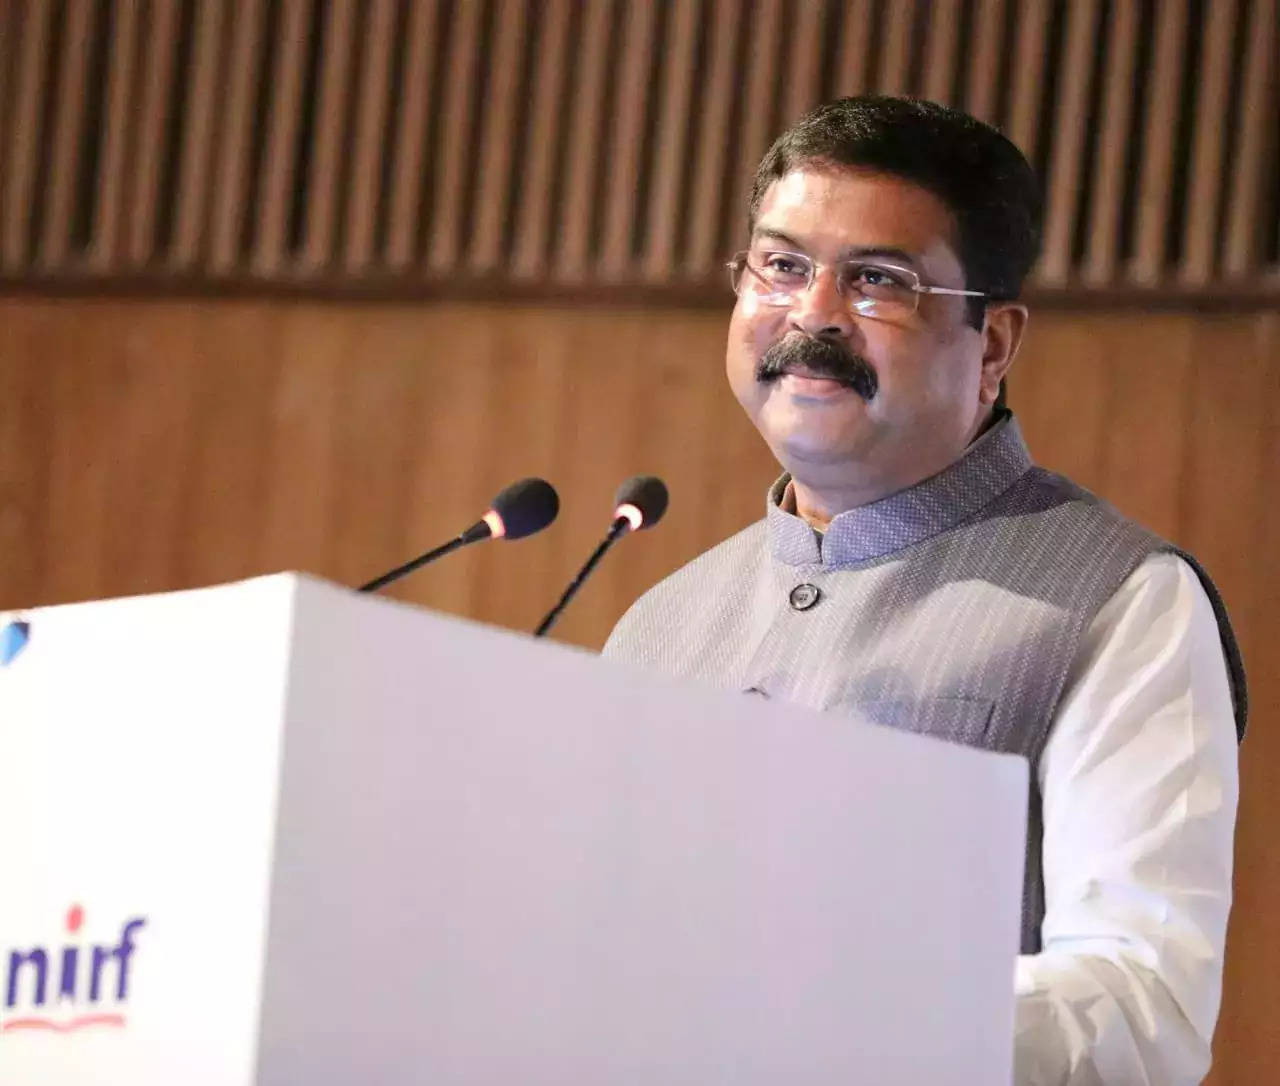 5G will benefit Education Sector in a big way, says Education Minister Dharmendra  Pradhan